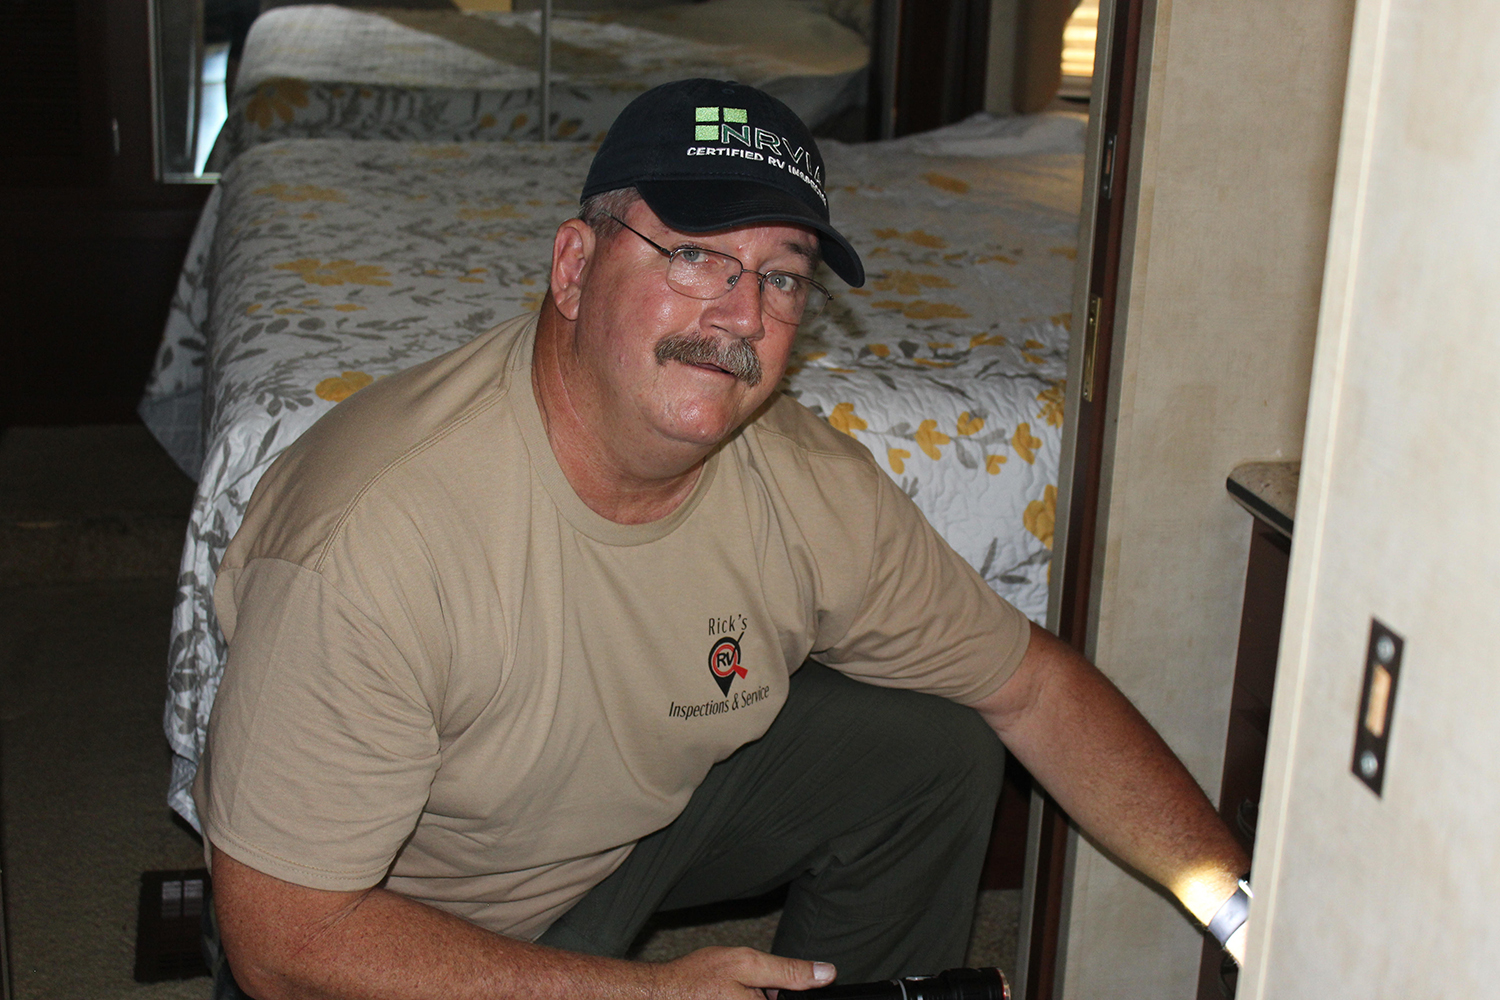 Rick Root, one of our RV Inspectors, inspecting the interior of a motorhome